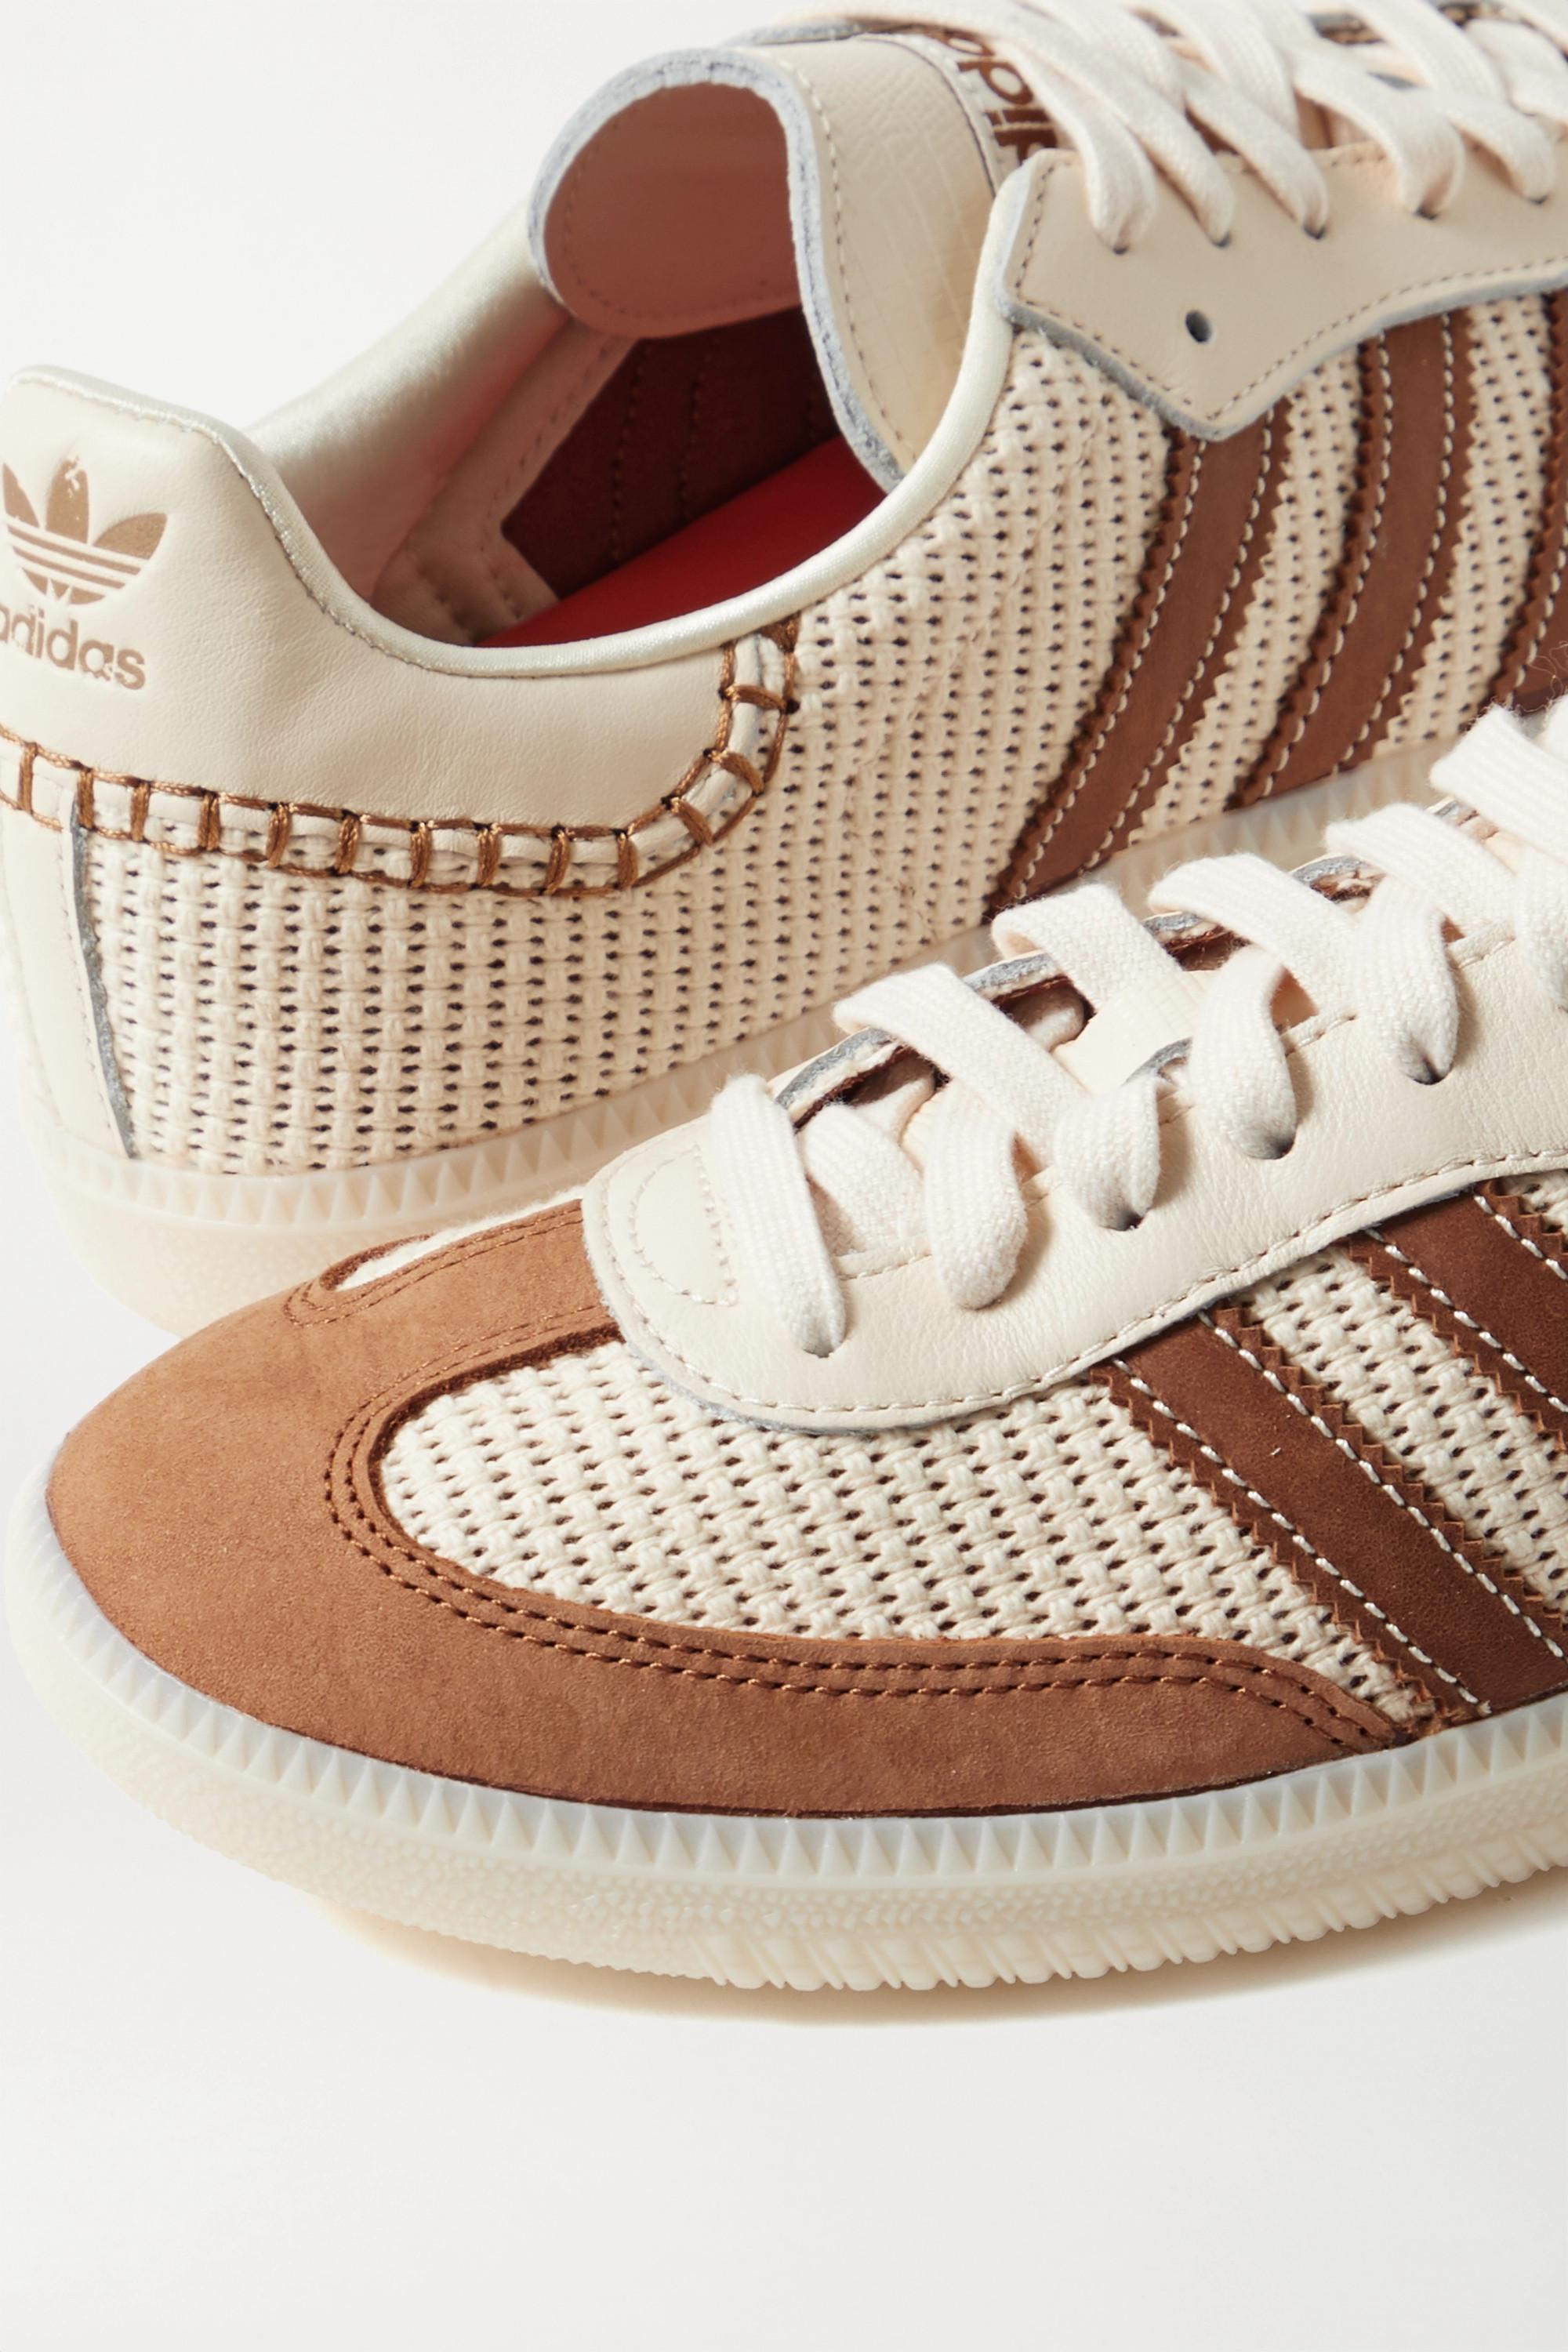 adidas Originals + Wales Bonner Samba Suede, Leather And Mesh Sneakers |  Lyst